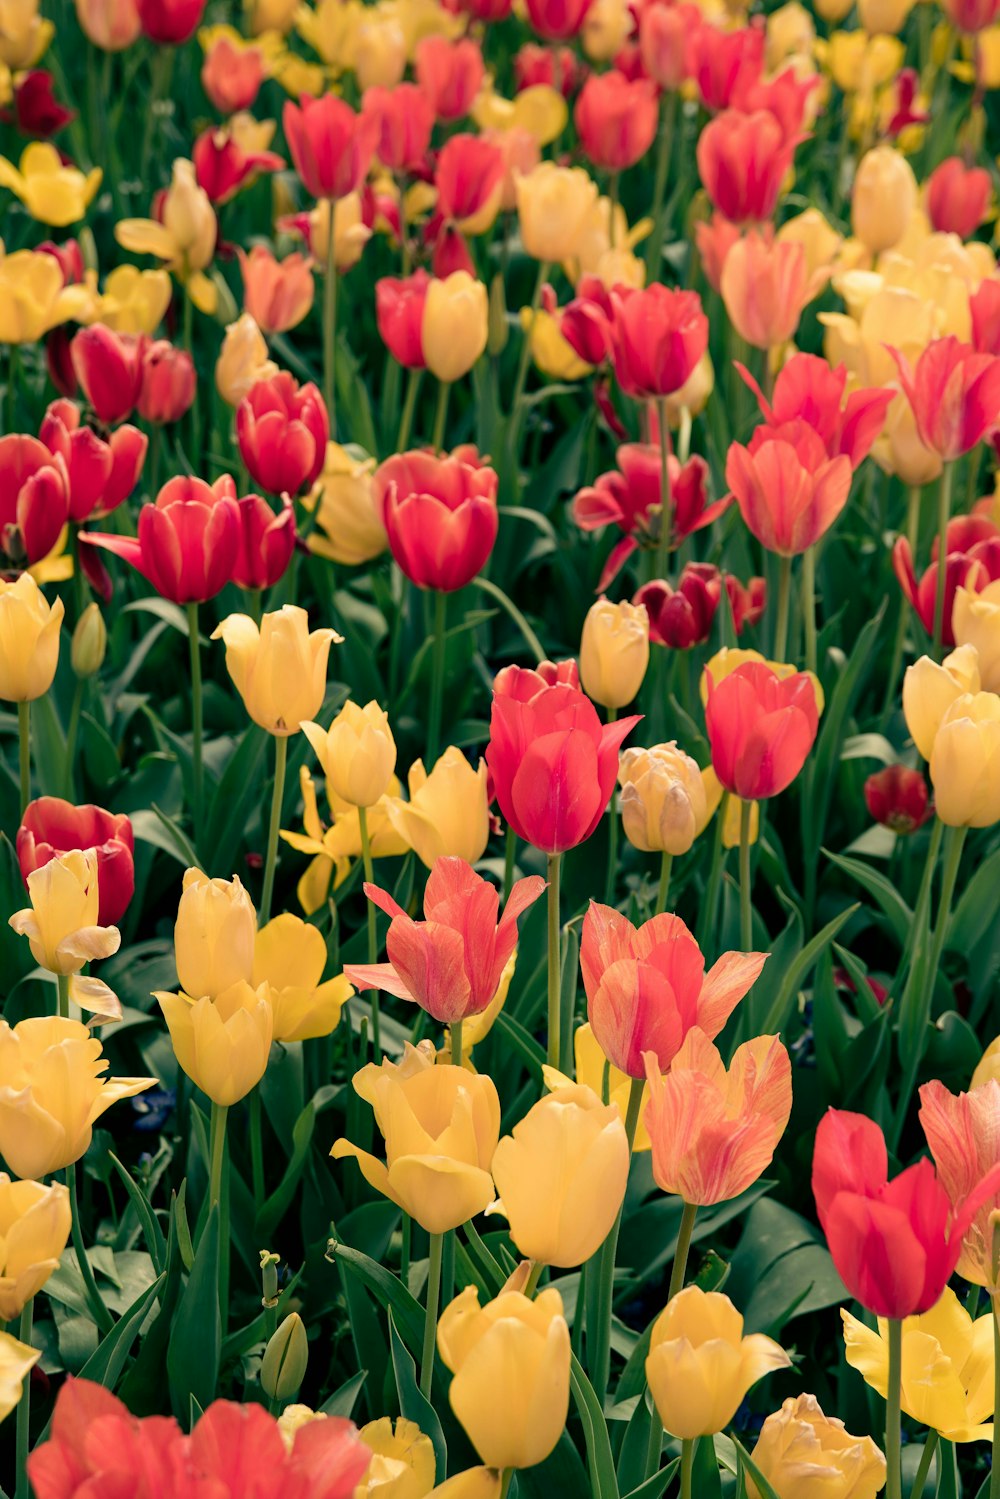 30k+ Tulip Field Pictures  Download Free Images on Unsplash